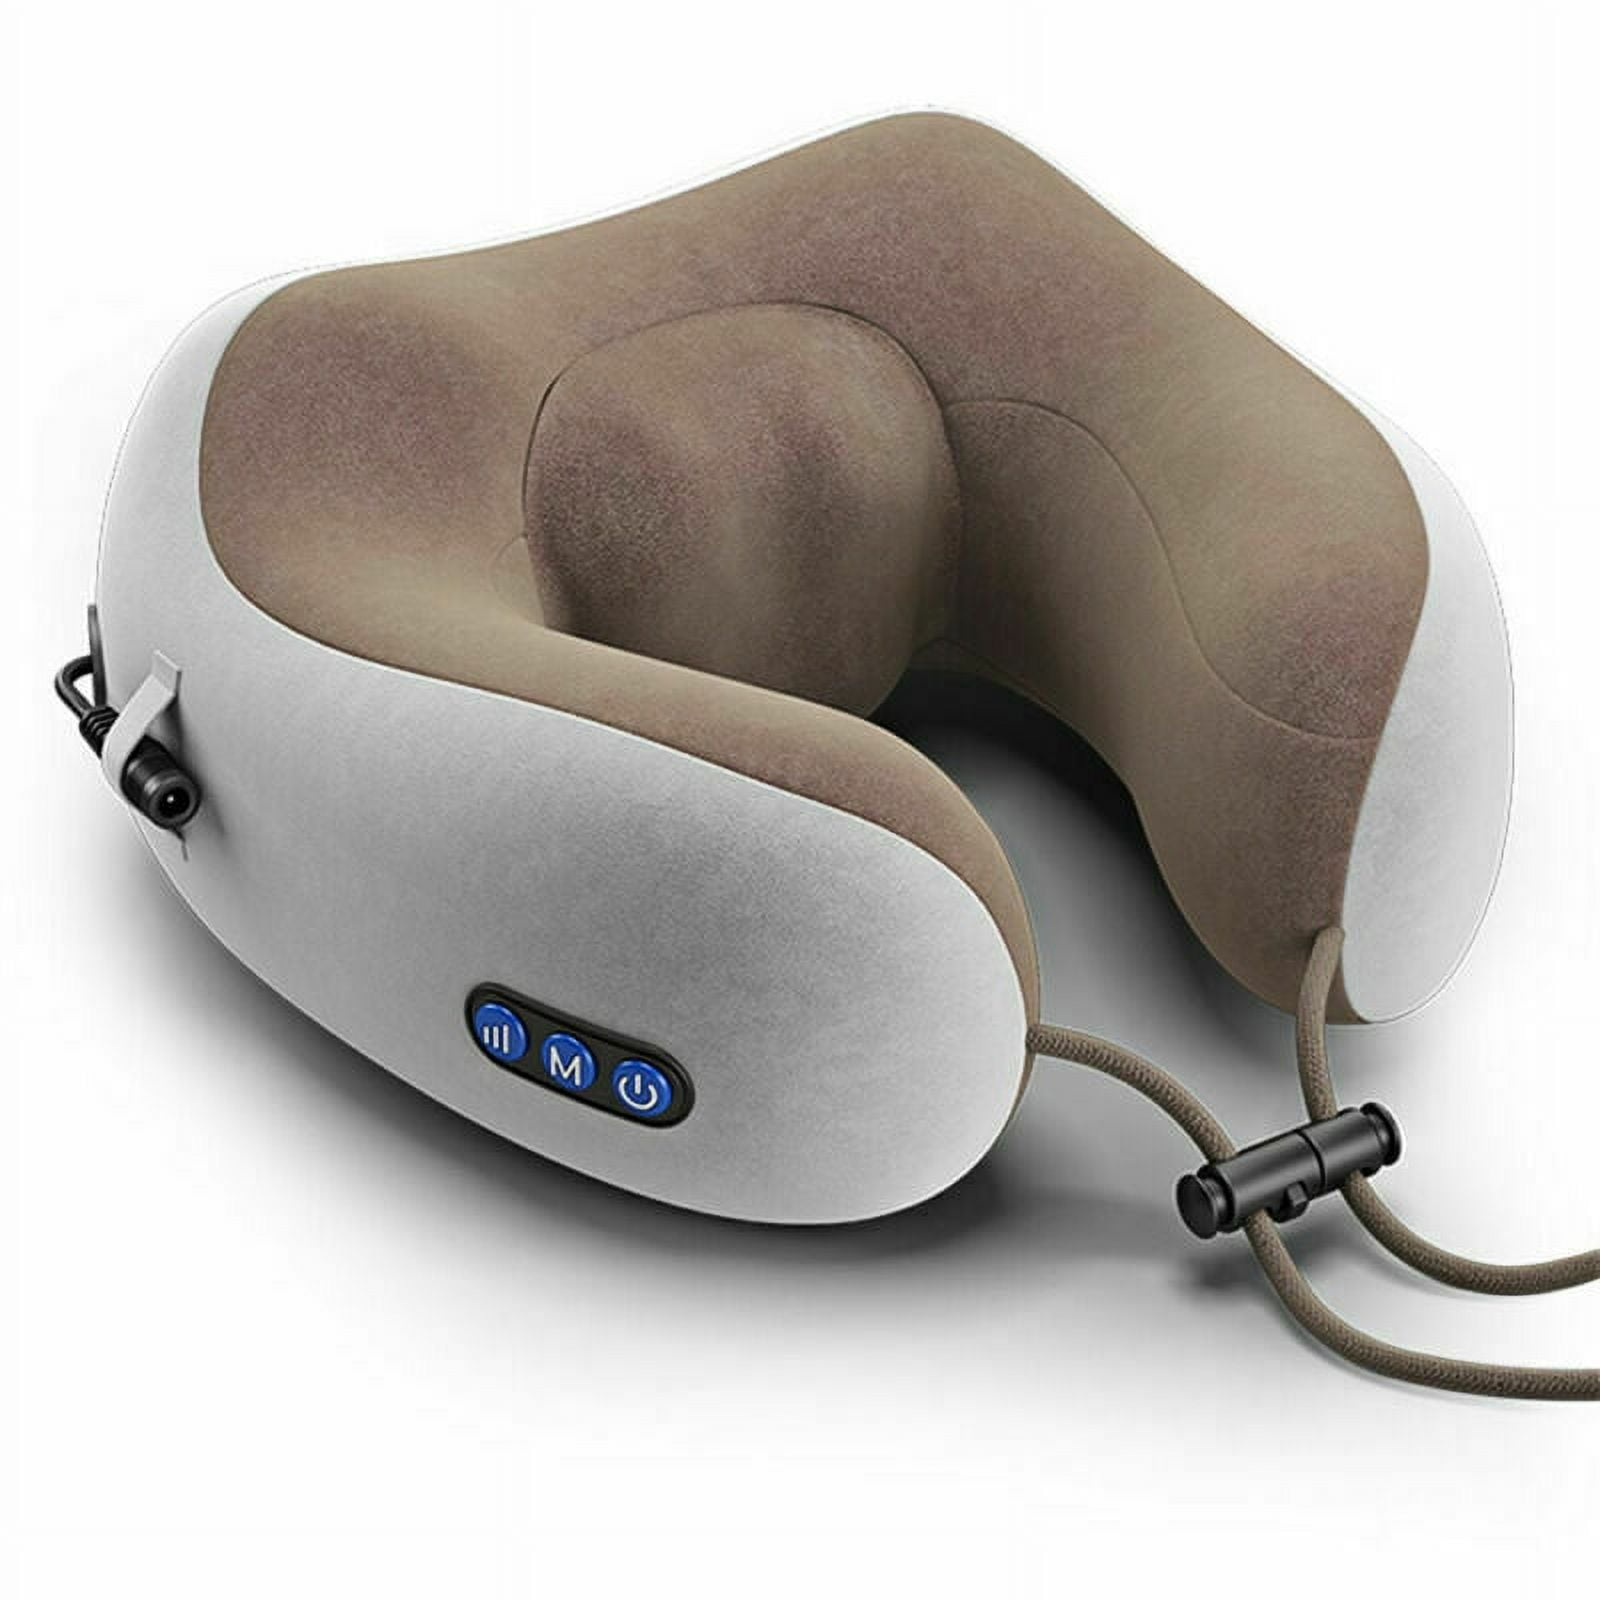 Electric Neck Massager, U-shaped Cervical Massager With Durable Memory Foam,  Massage Pillow For Deep Tissue Kneading And Relaxation, Ideal For Airplane,  Car, Travel, Office And Home, Single Node Version